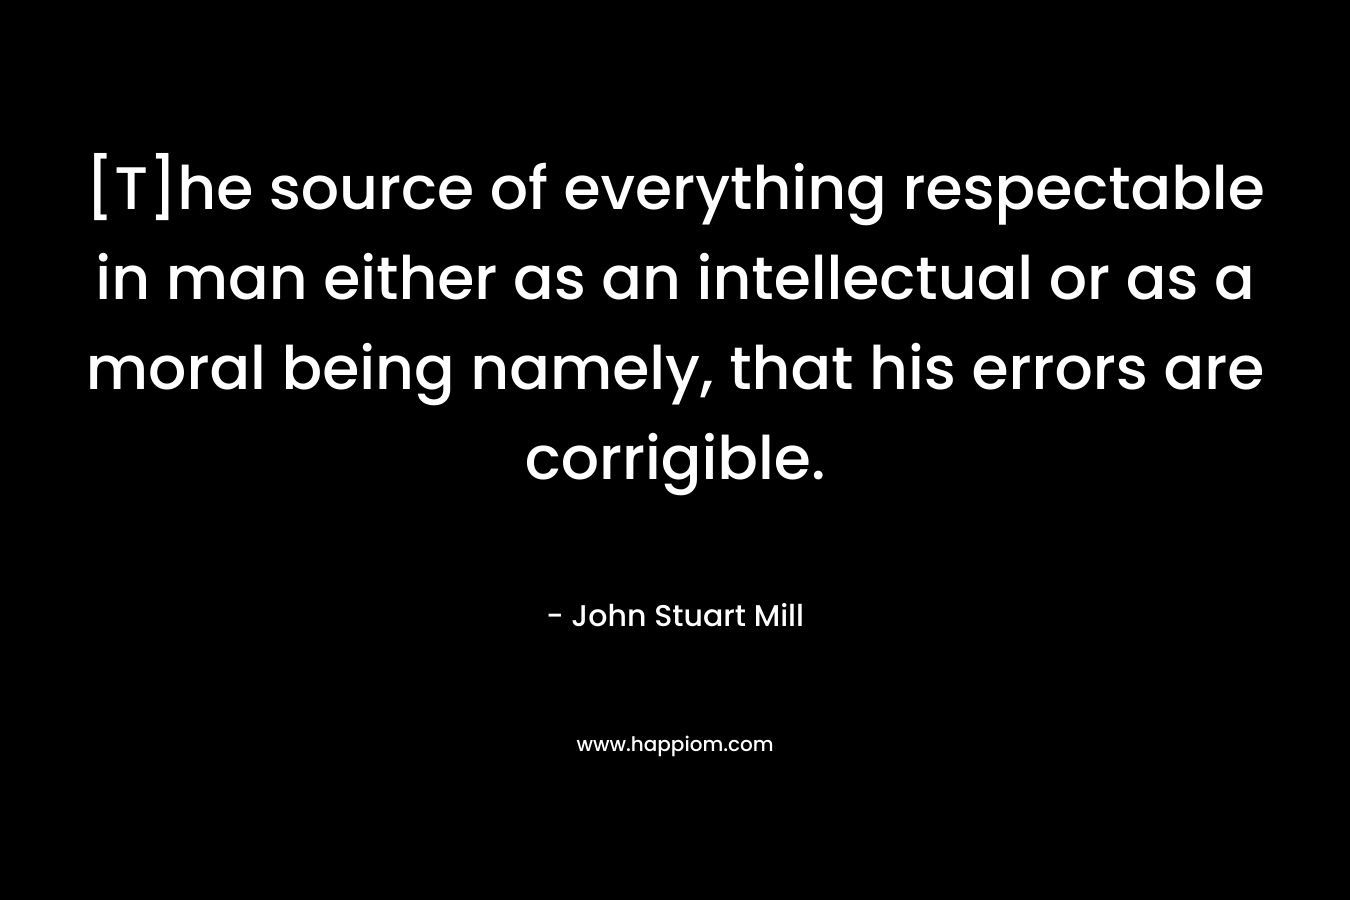 [T]he source of everything respectable in man either as an intellectual or as a moral being namely, that his errors are corrigible. – John Stuart Mill